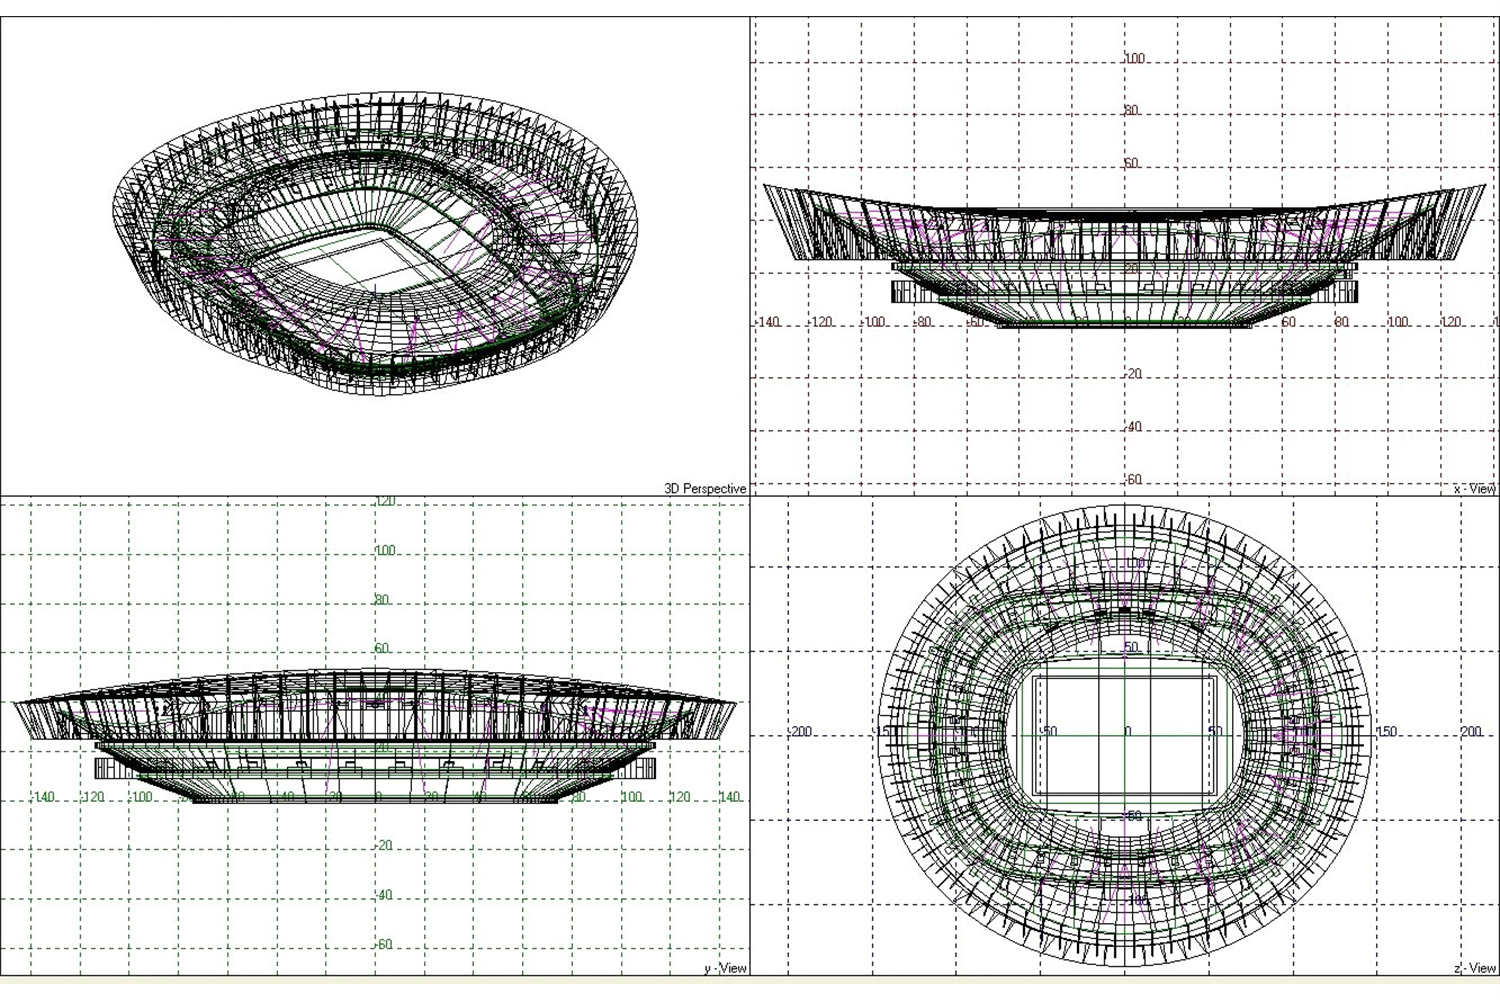 Green Point Stadium in Cape Town, South Africa. Noise emissions and consulting by ADA-AMC, a WSDG Company. Presentation drawings.